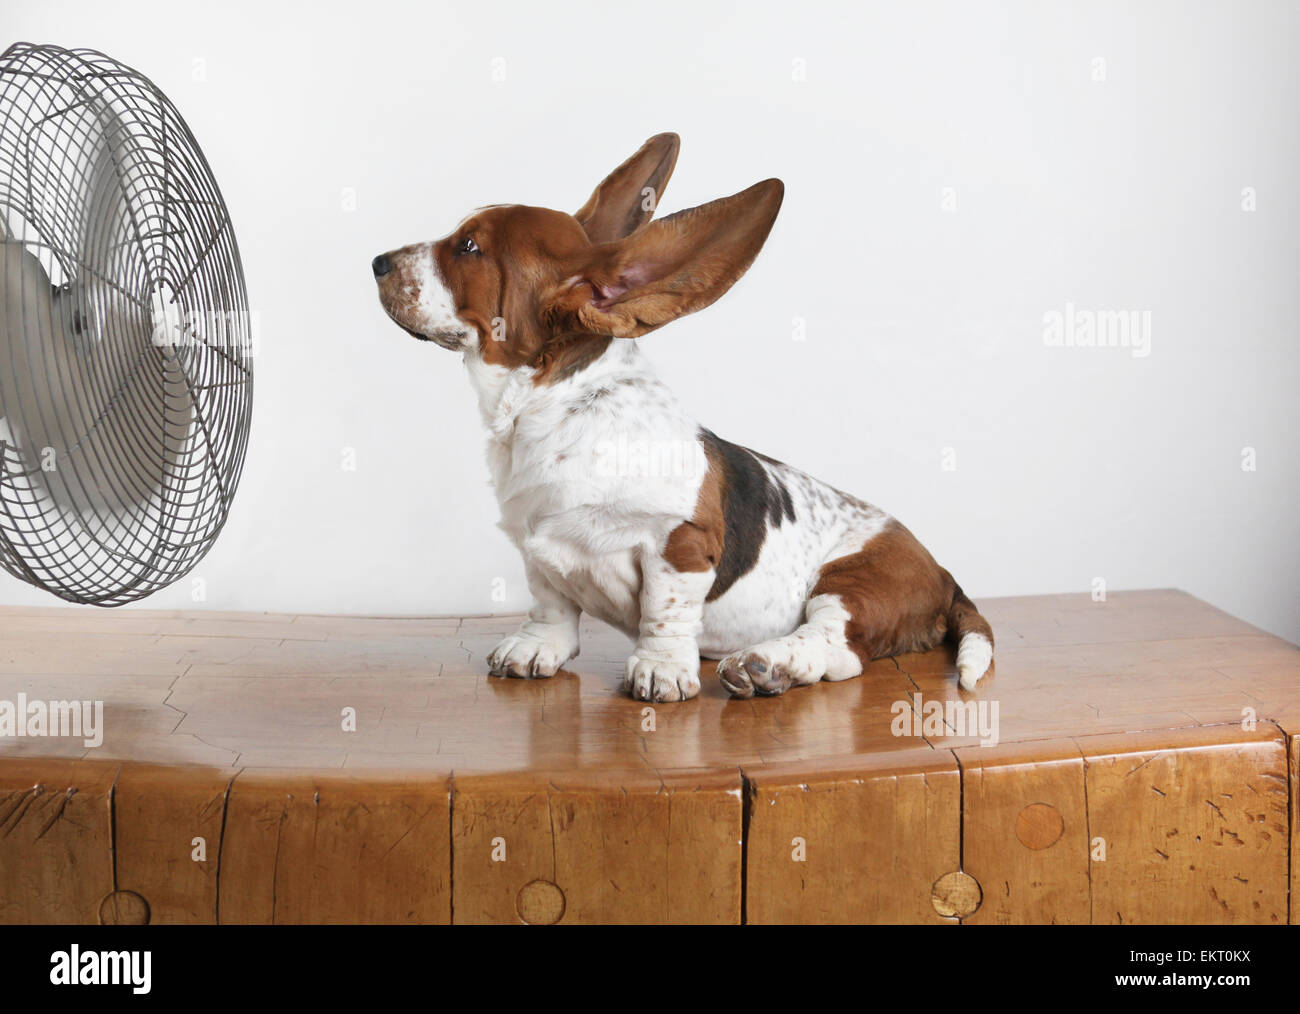 Studio Shot Of A Basset Hound With Fan Blowing It's Ears Up Stock Photo -  Alamy